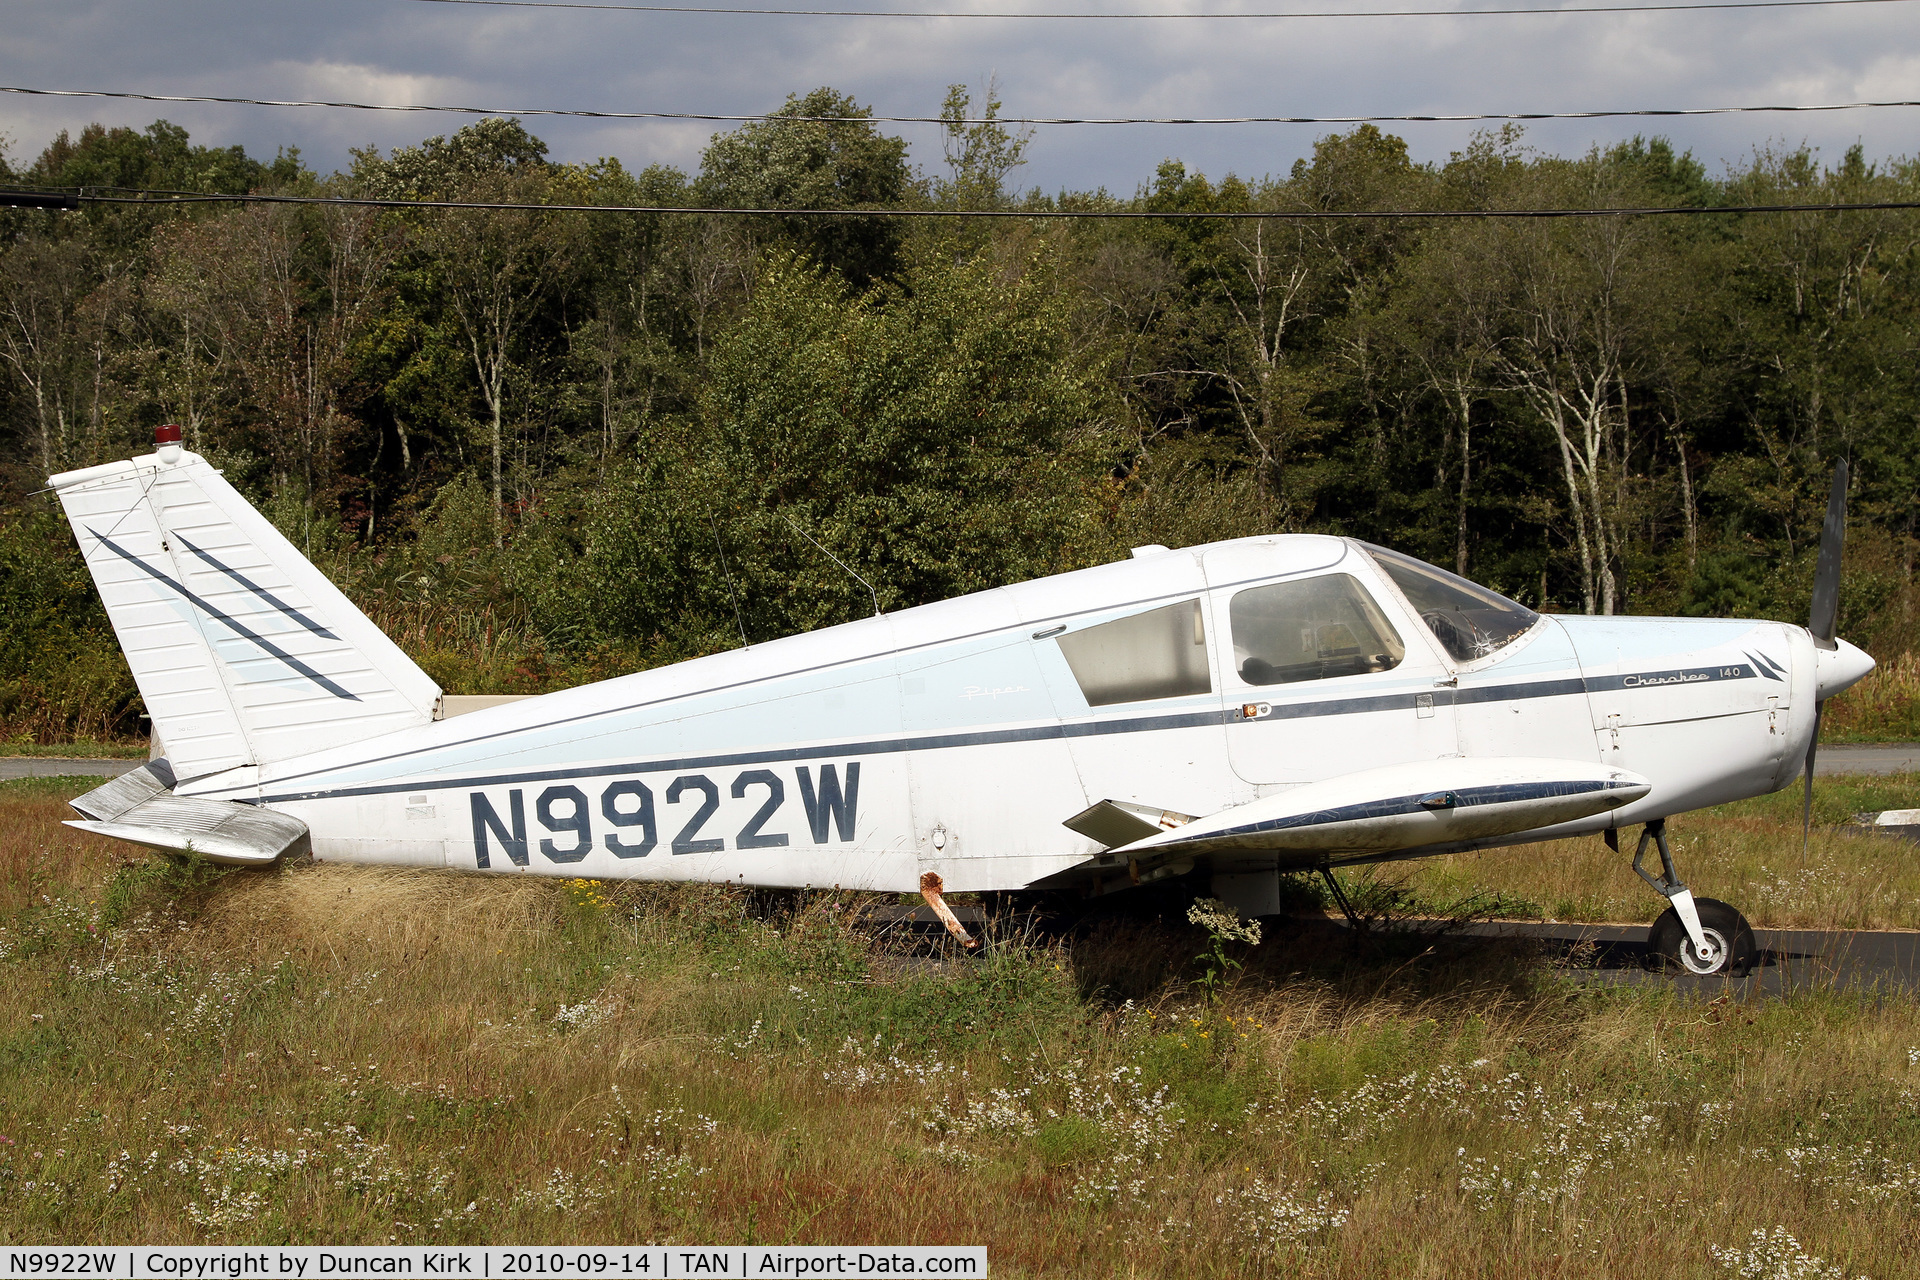 N9922W, 1967 Piper PA-28-140 C/N 28-23446, Looking a tad weathered